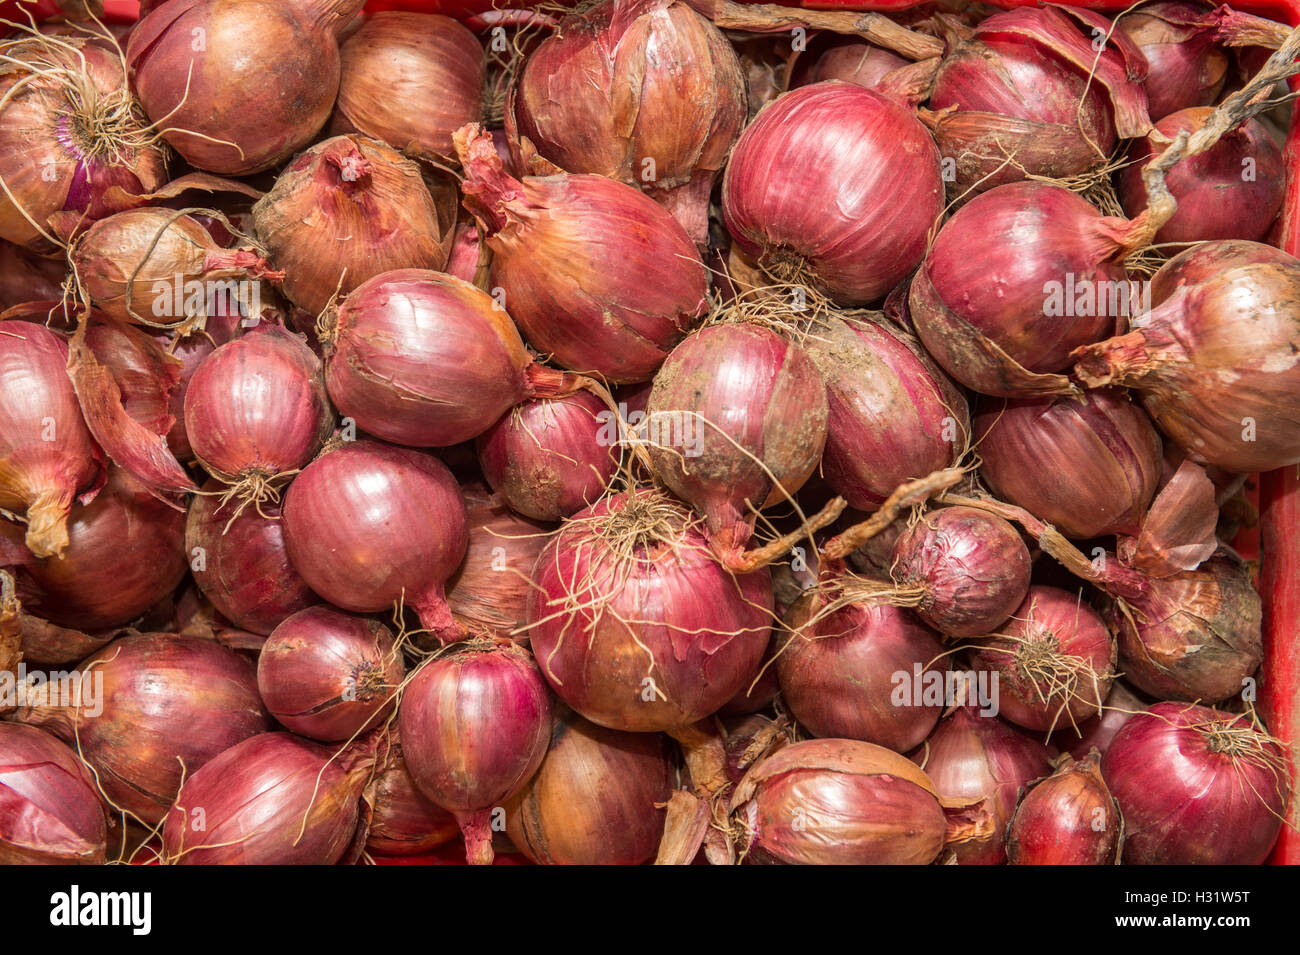 https://c8.alamy.com/comp/H31W5T/fresh-red-onions-in-a-pile-on-a-farm-in-harrison-maine-H31W5T.jpg